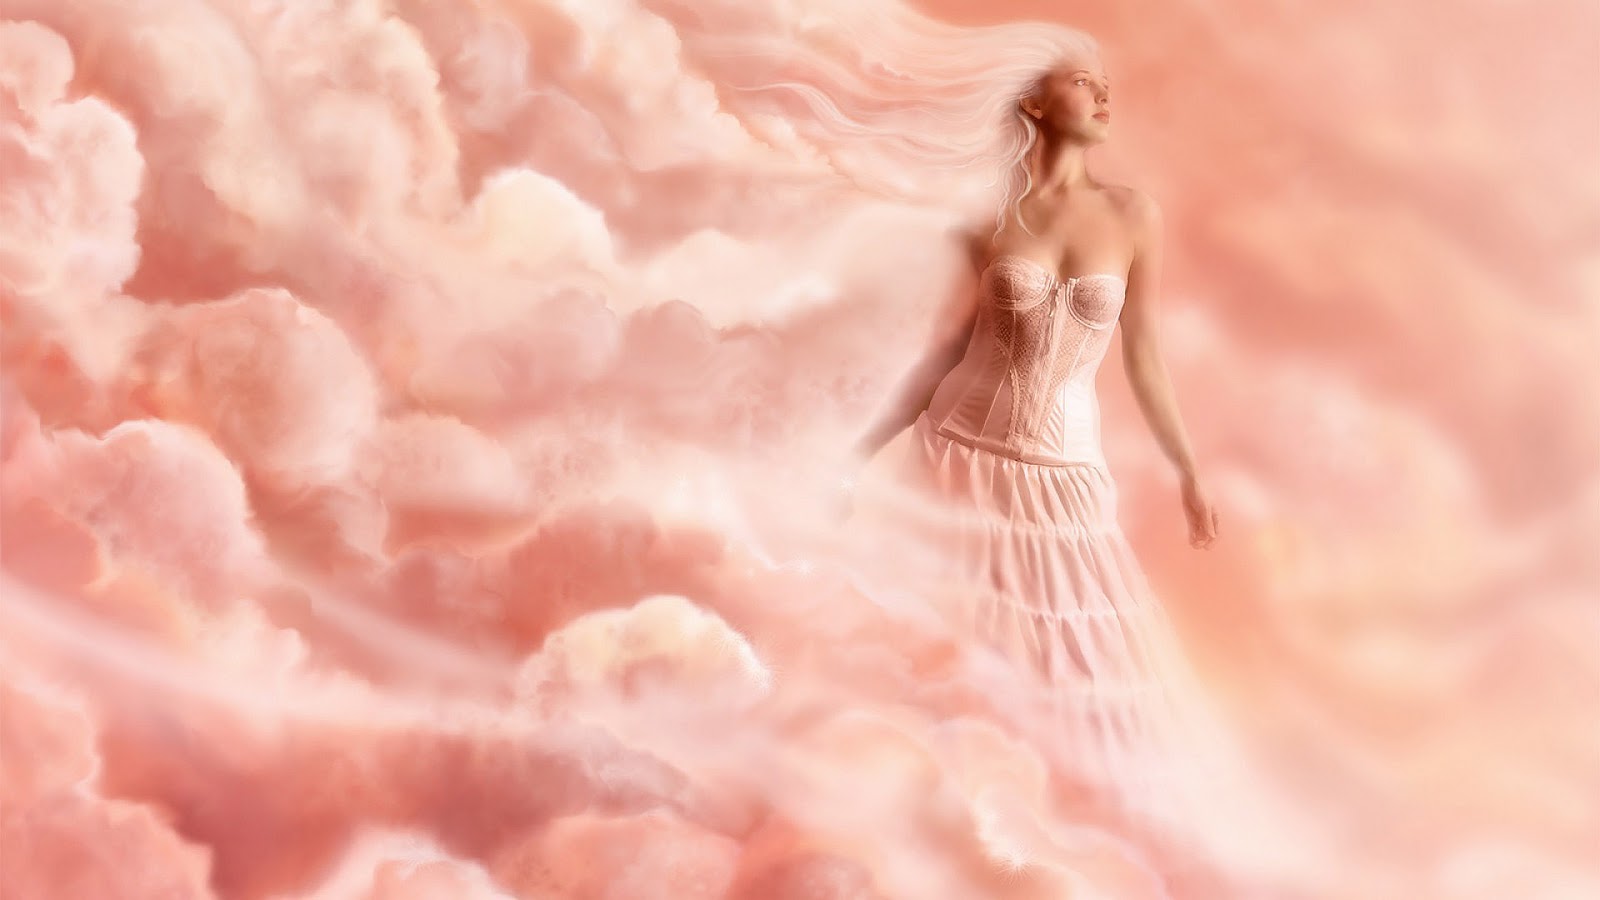 the pink angel wallpaper by greenhairalien on pink angel wallpapers